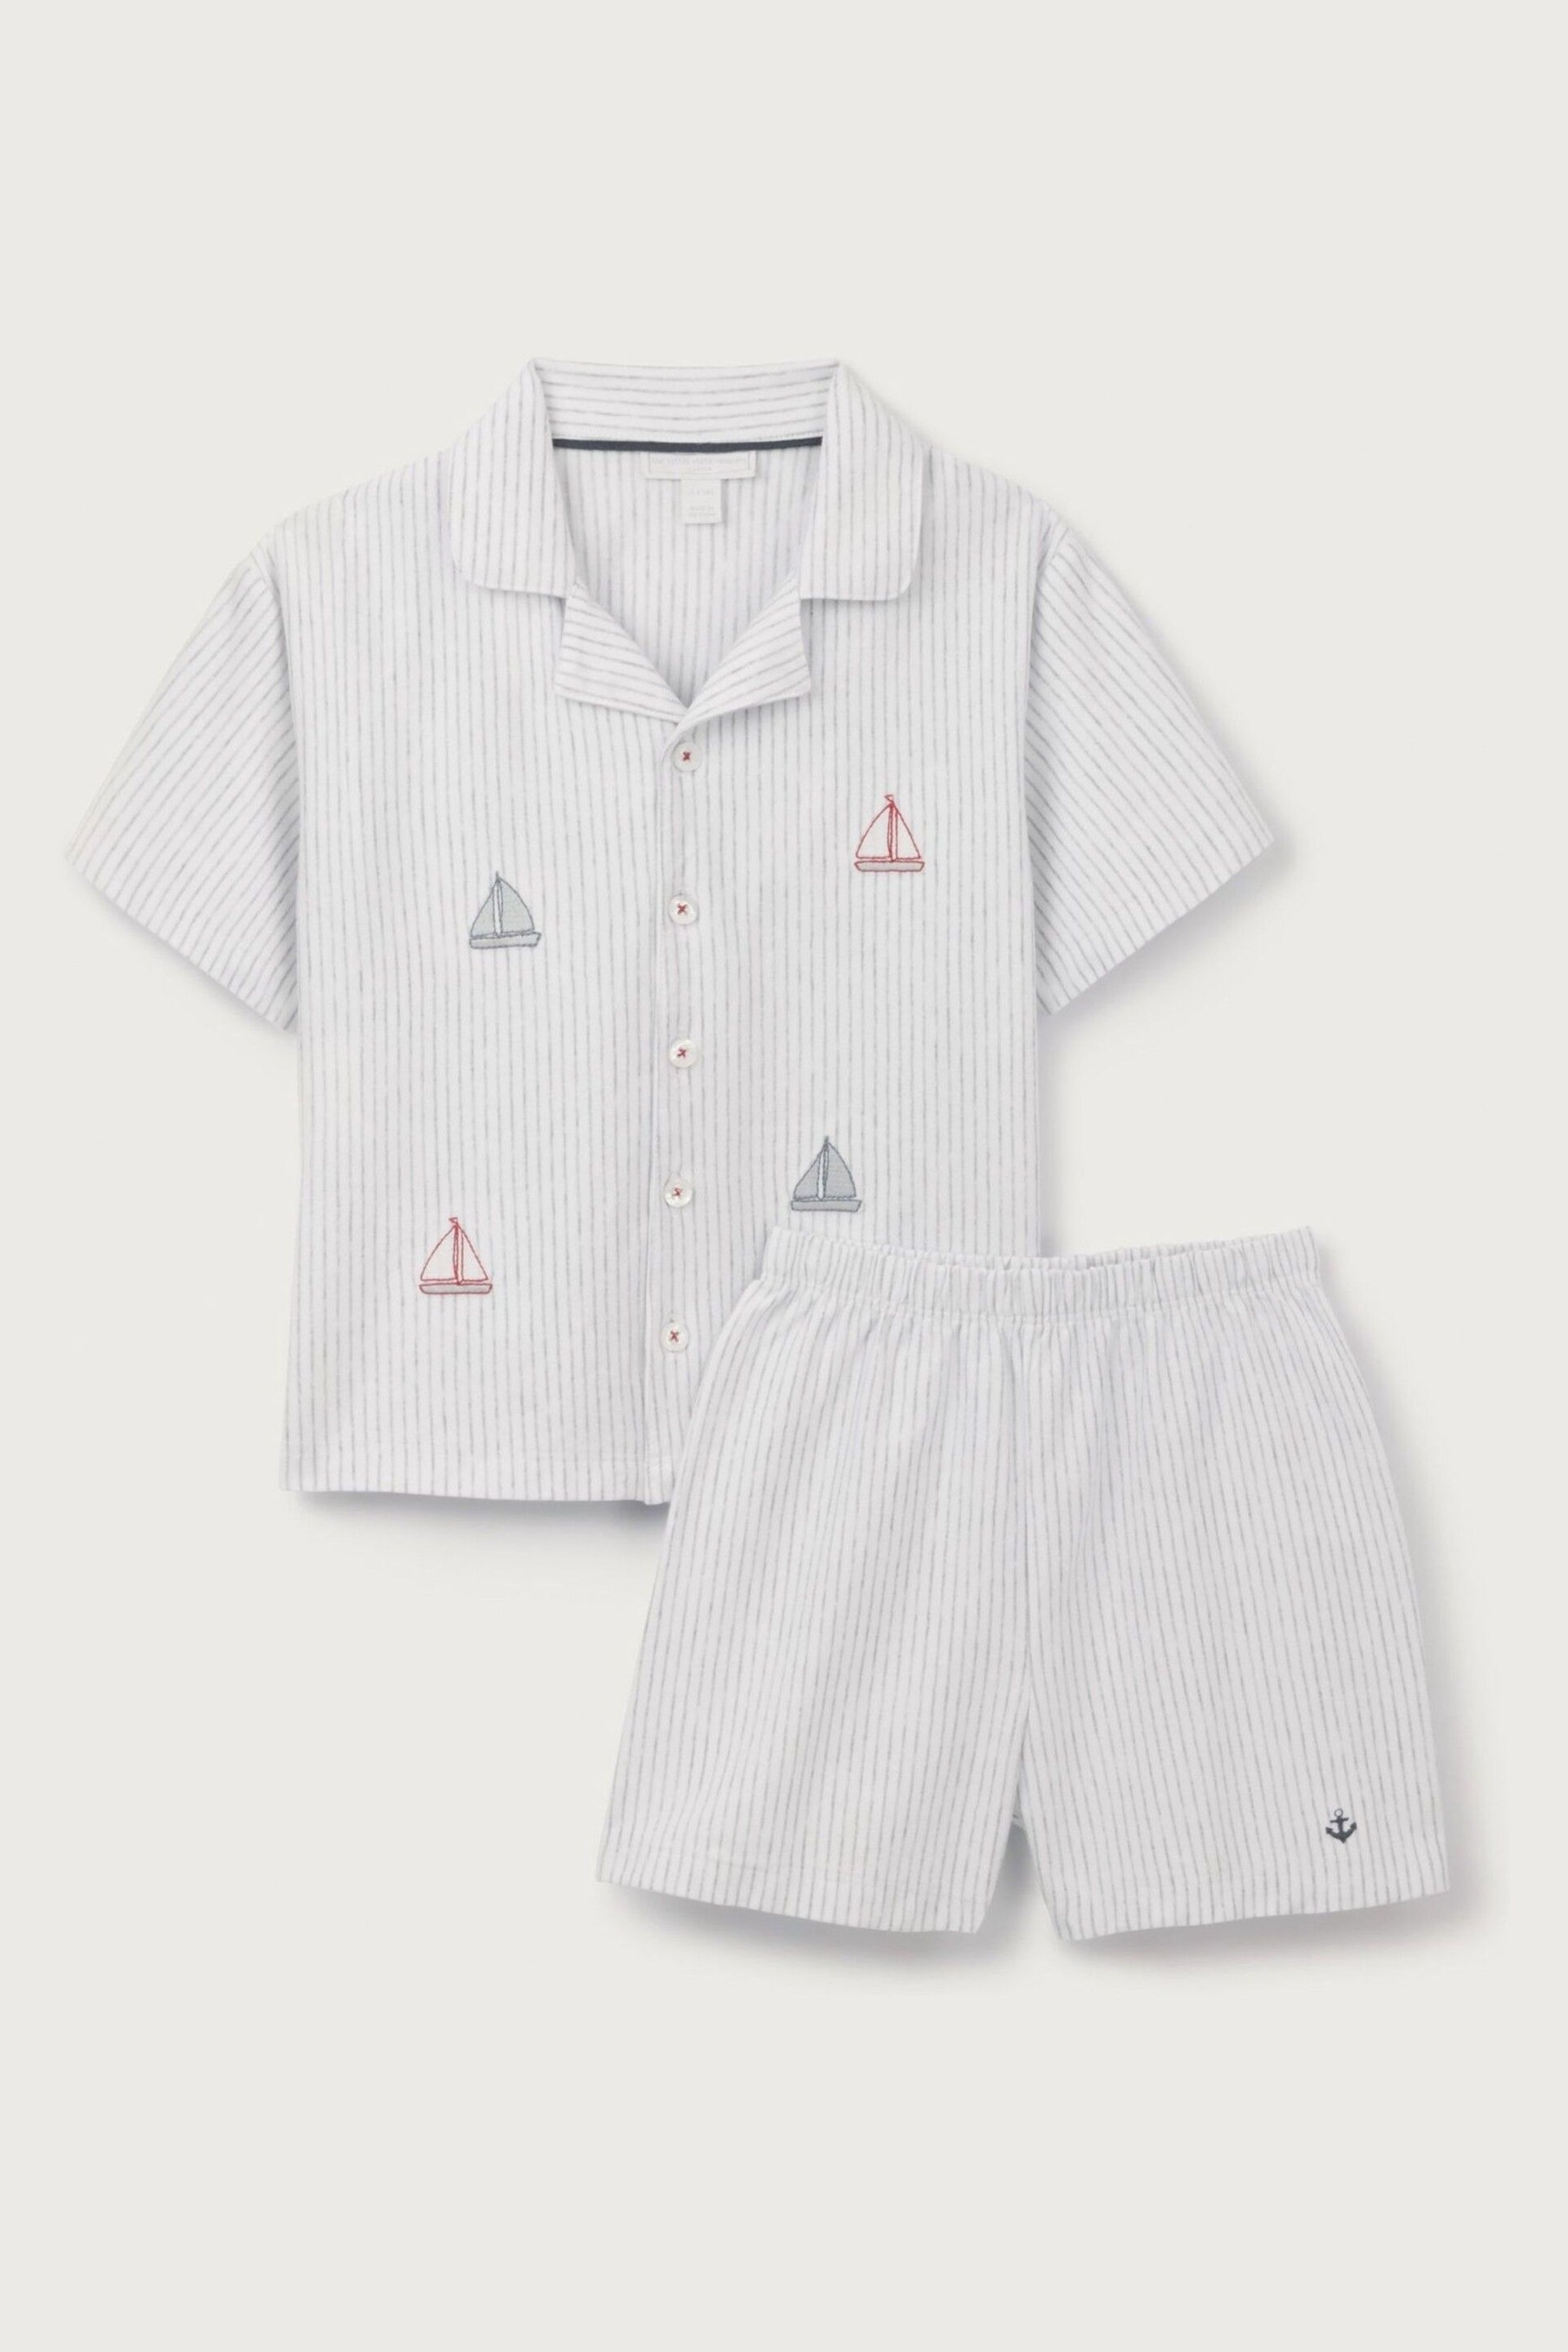 The White Company White Cotton Classic Sailboat Embroidered Shortie Pyjamas - Image 4 of 6